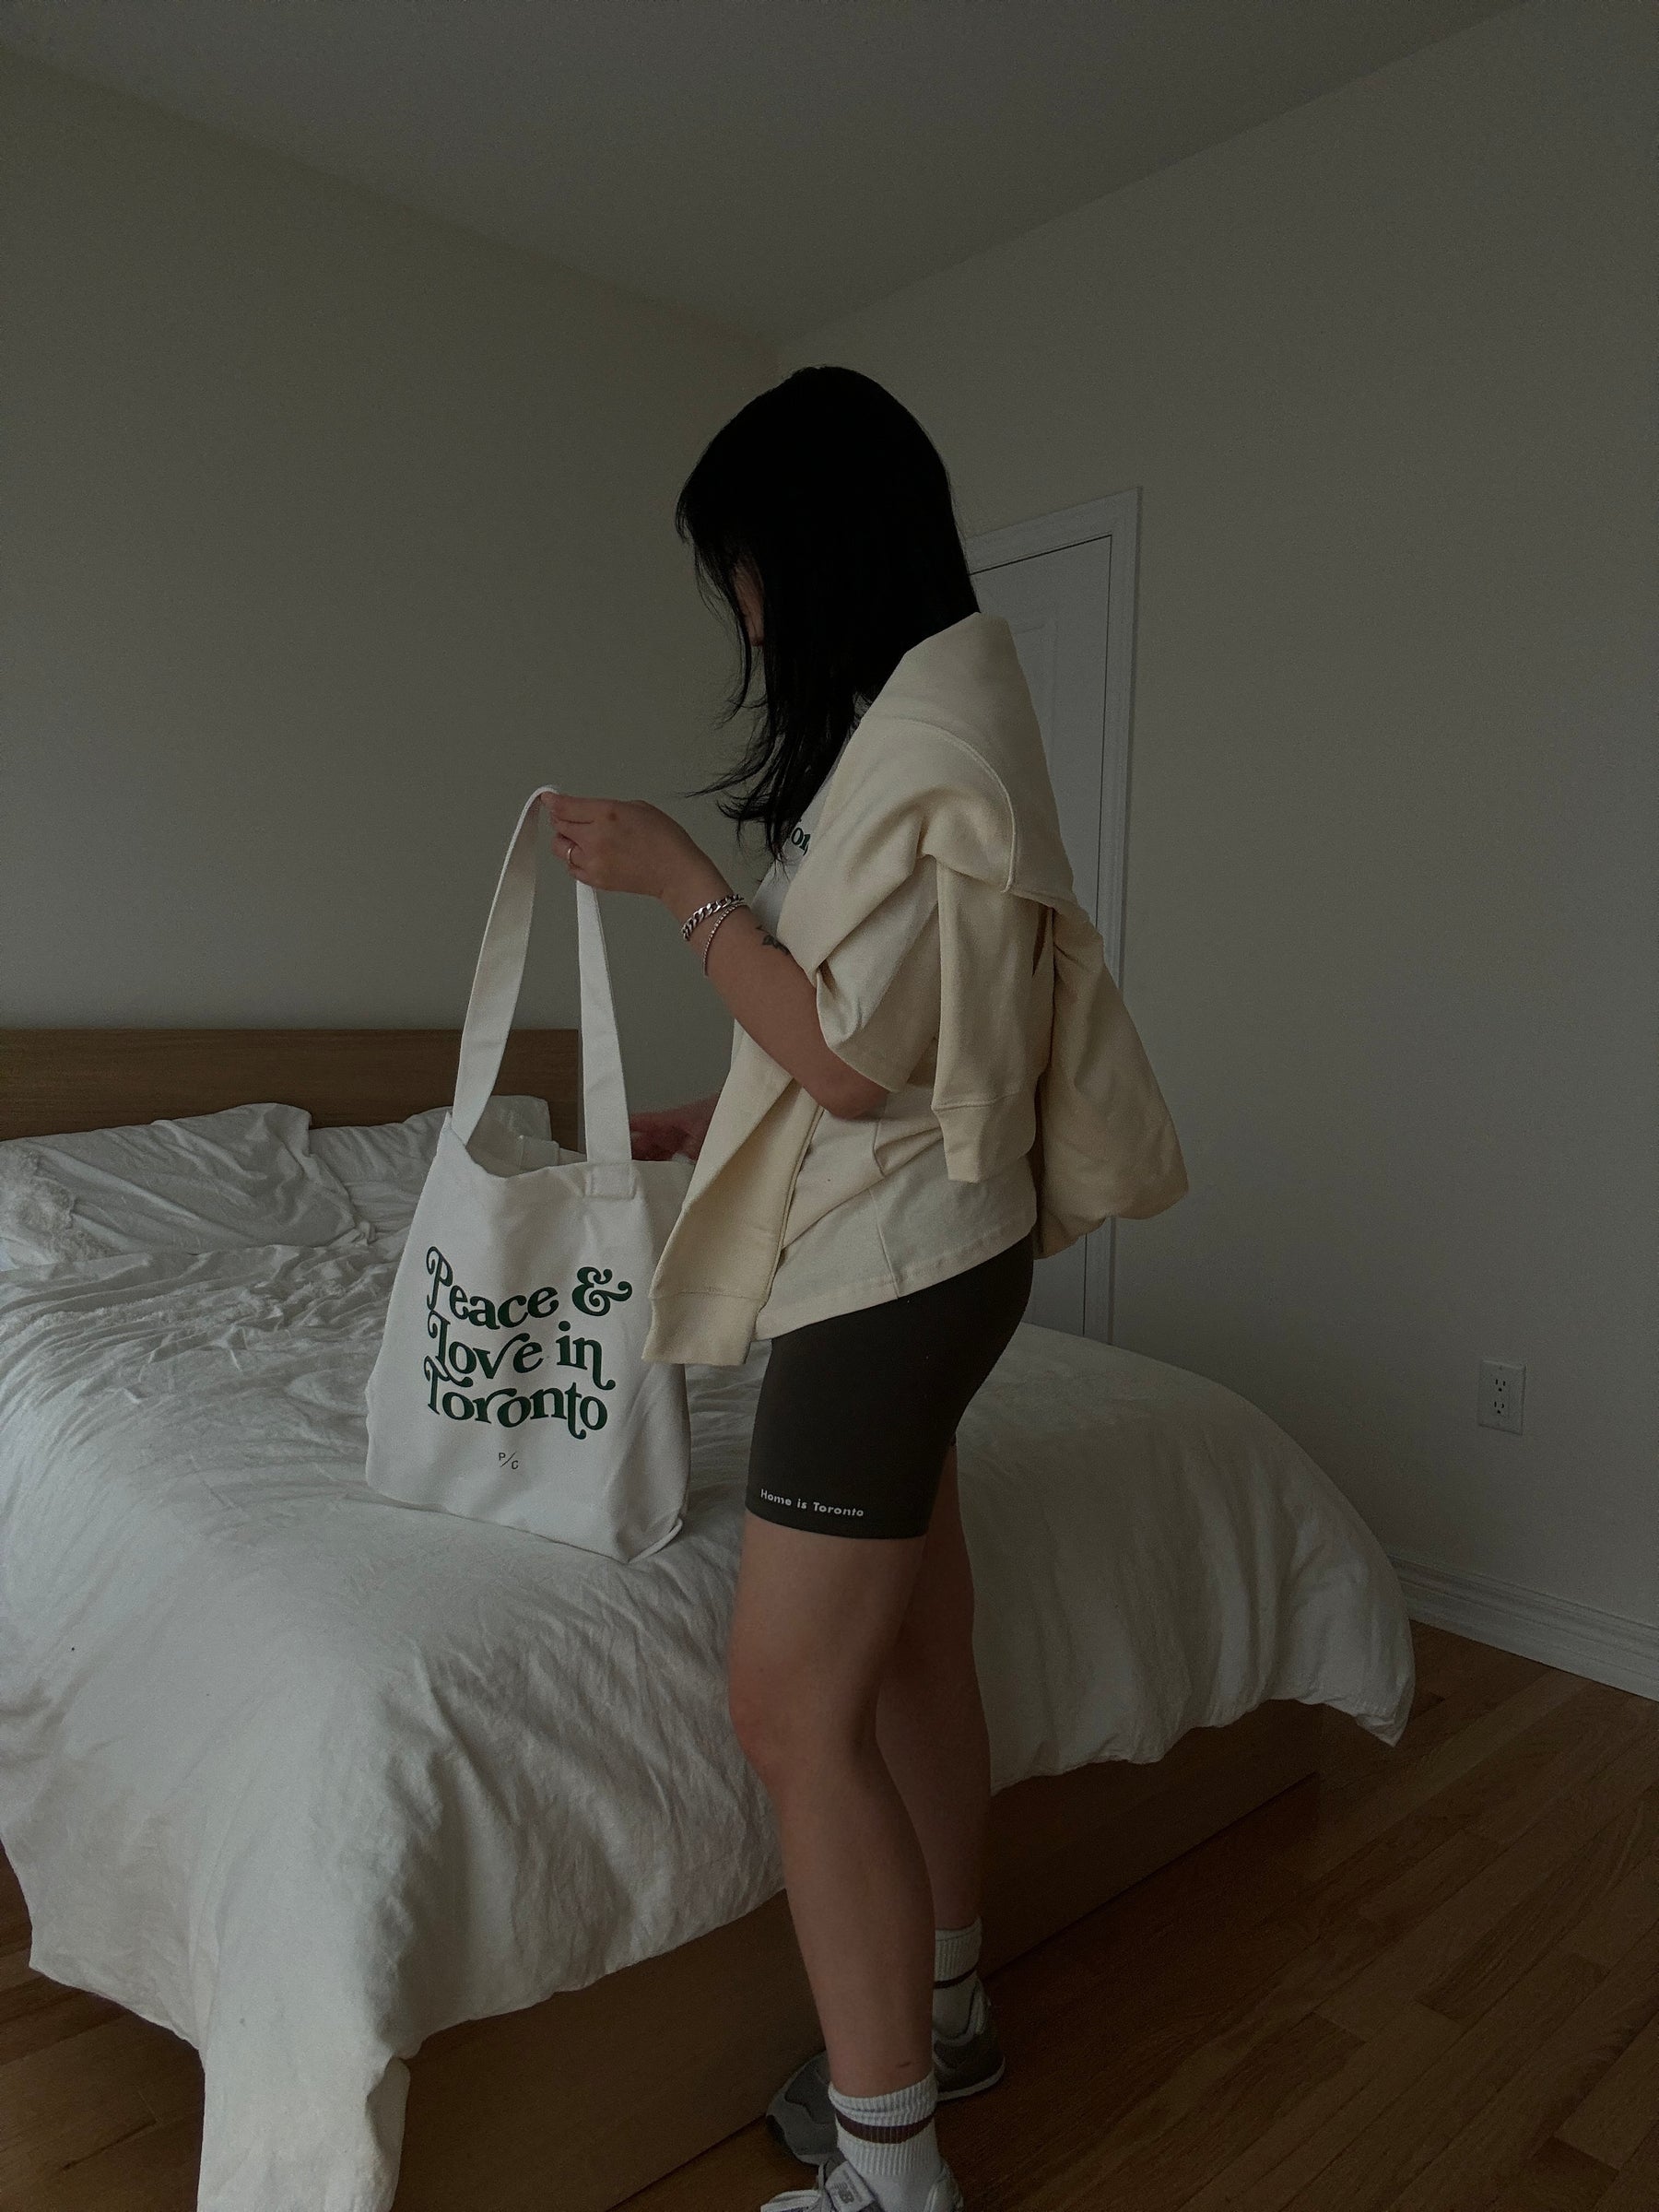 Peace & Love in Toronto Tote Bag - Ivory